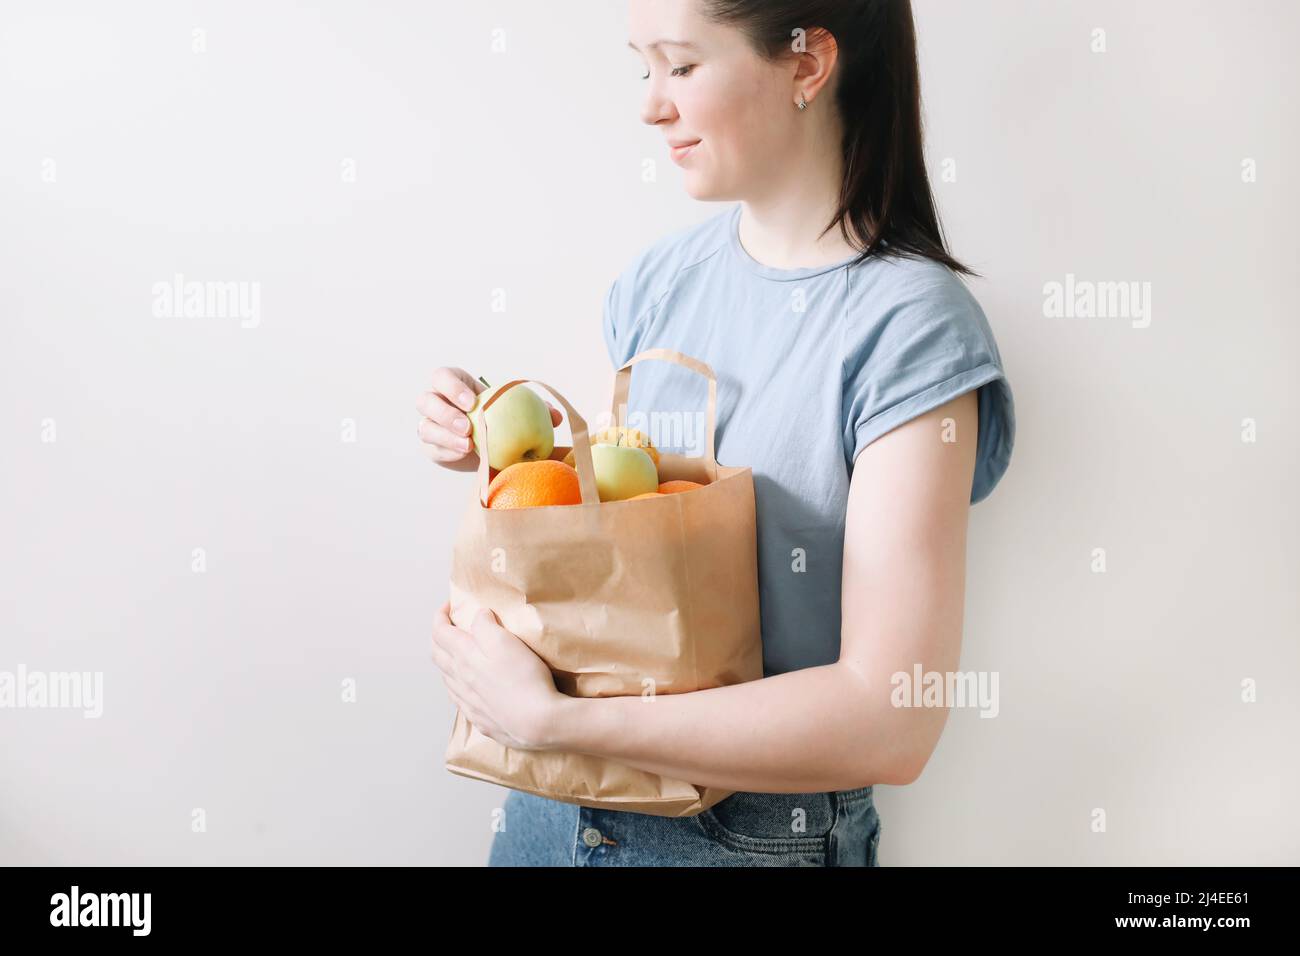 shopping, healthy eating and eco friendly concept - close up of woman holding eco bag with fruits on white background Stock Photo